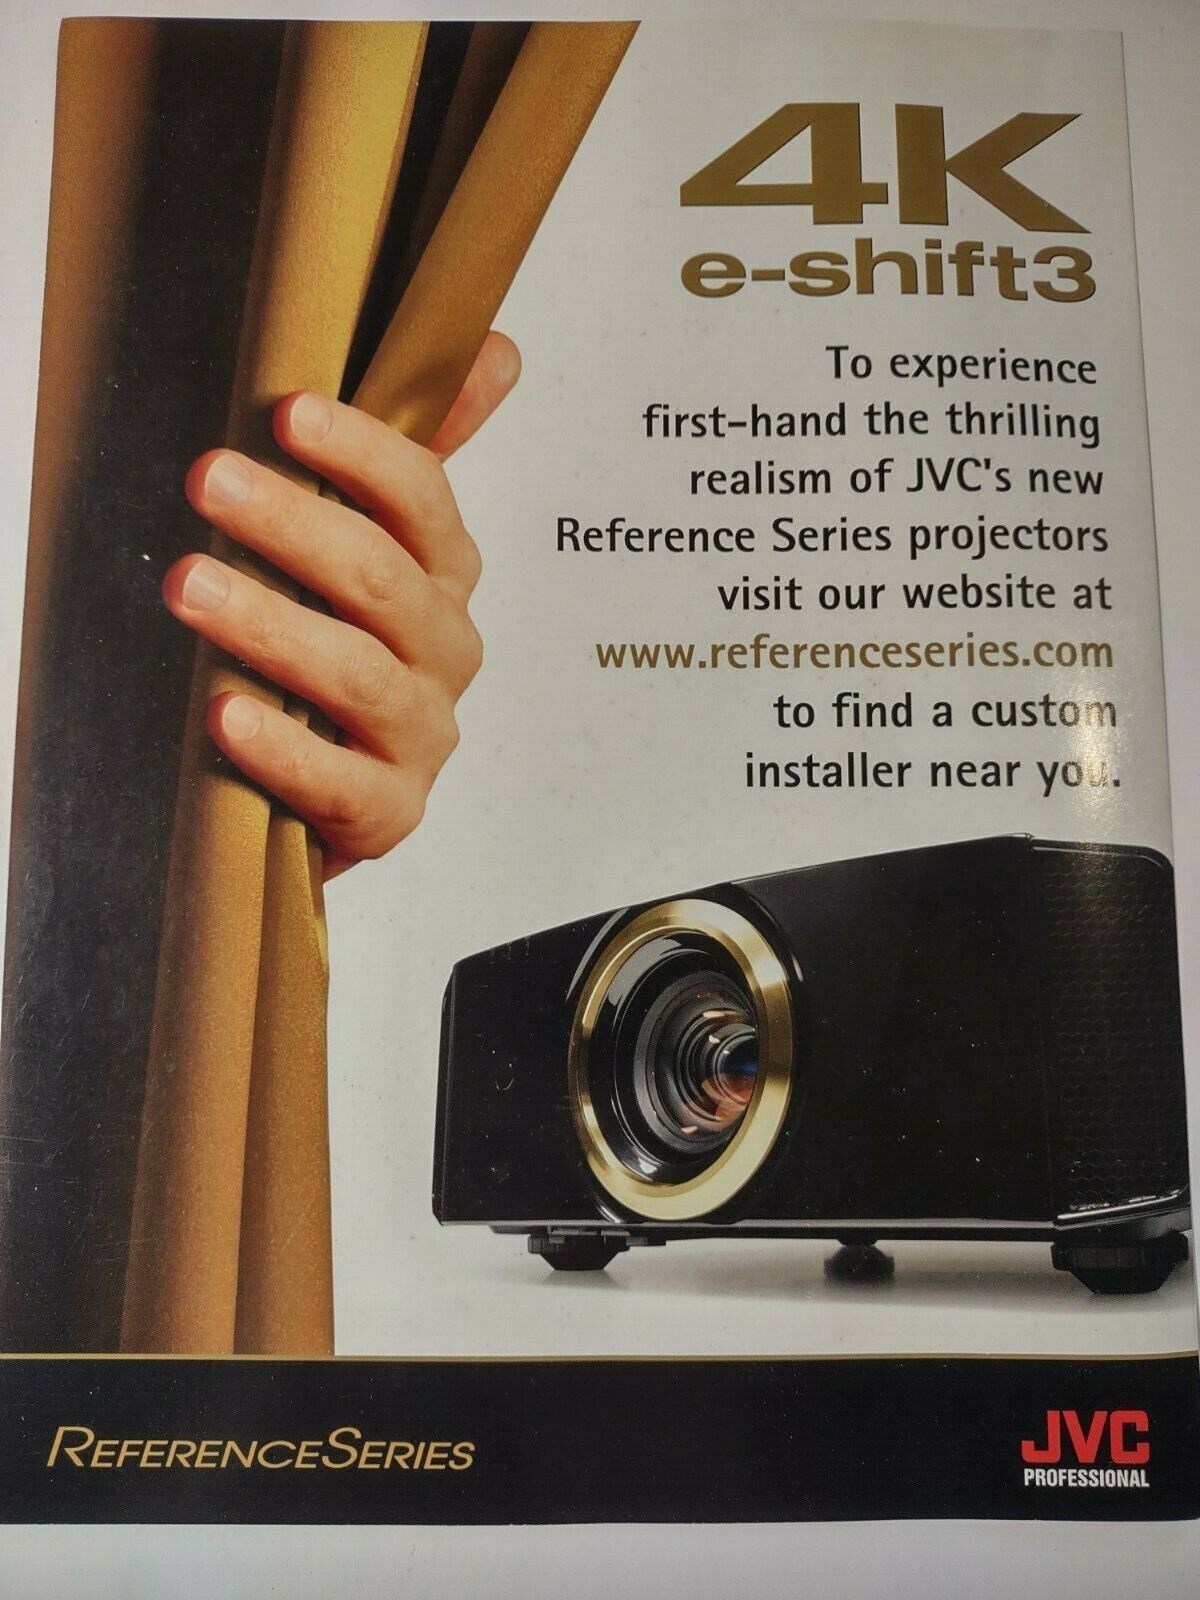 JVC Professional 4K Eshift 3 Reference Series Projector Vintage Print Ad